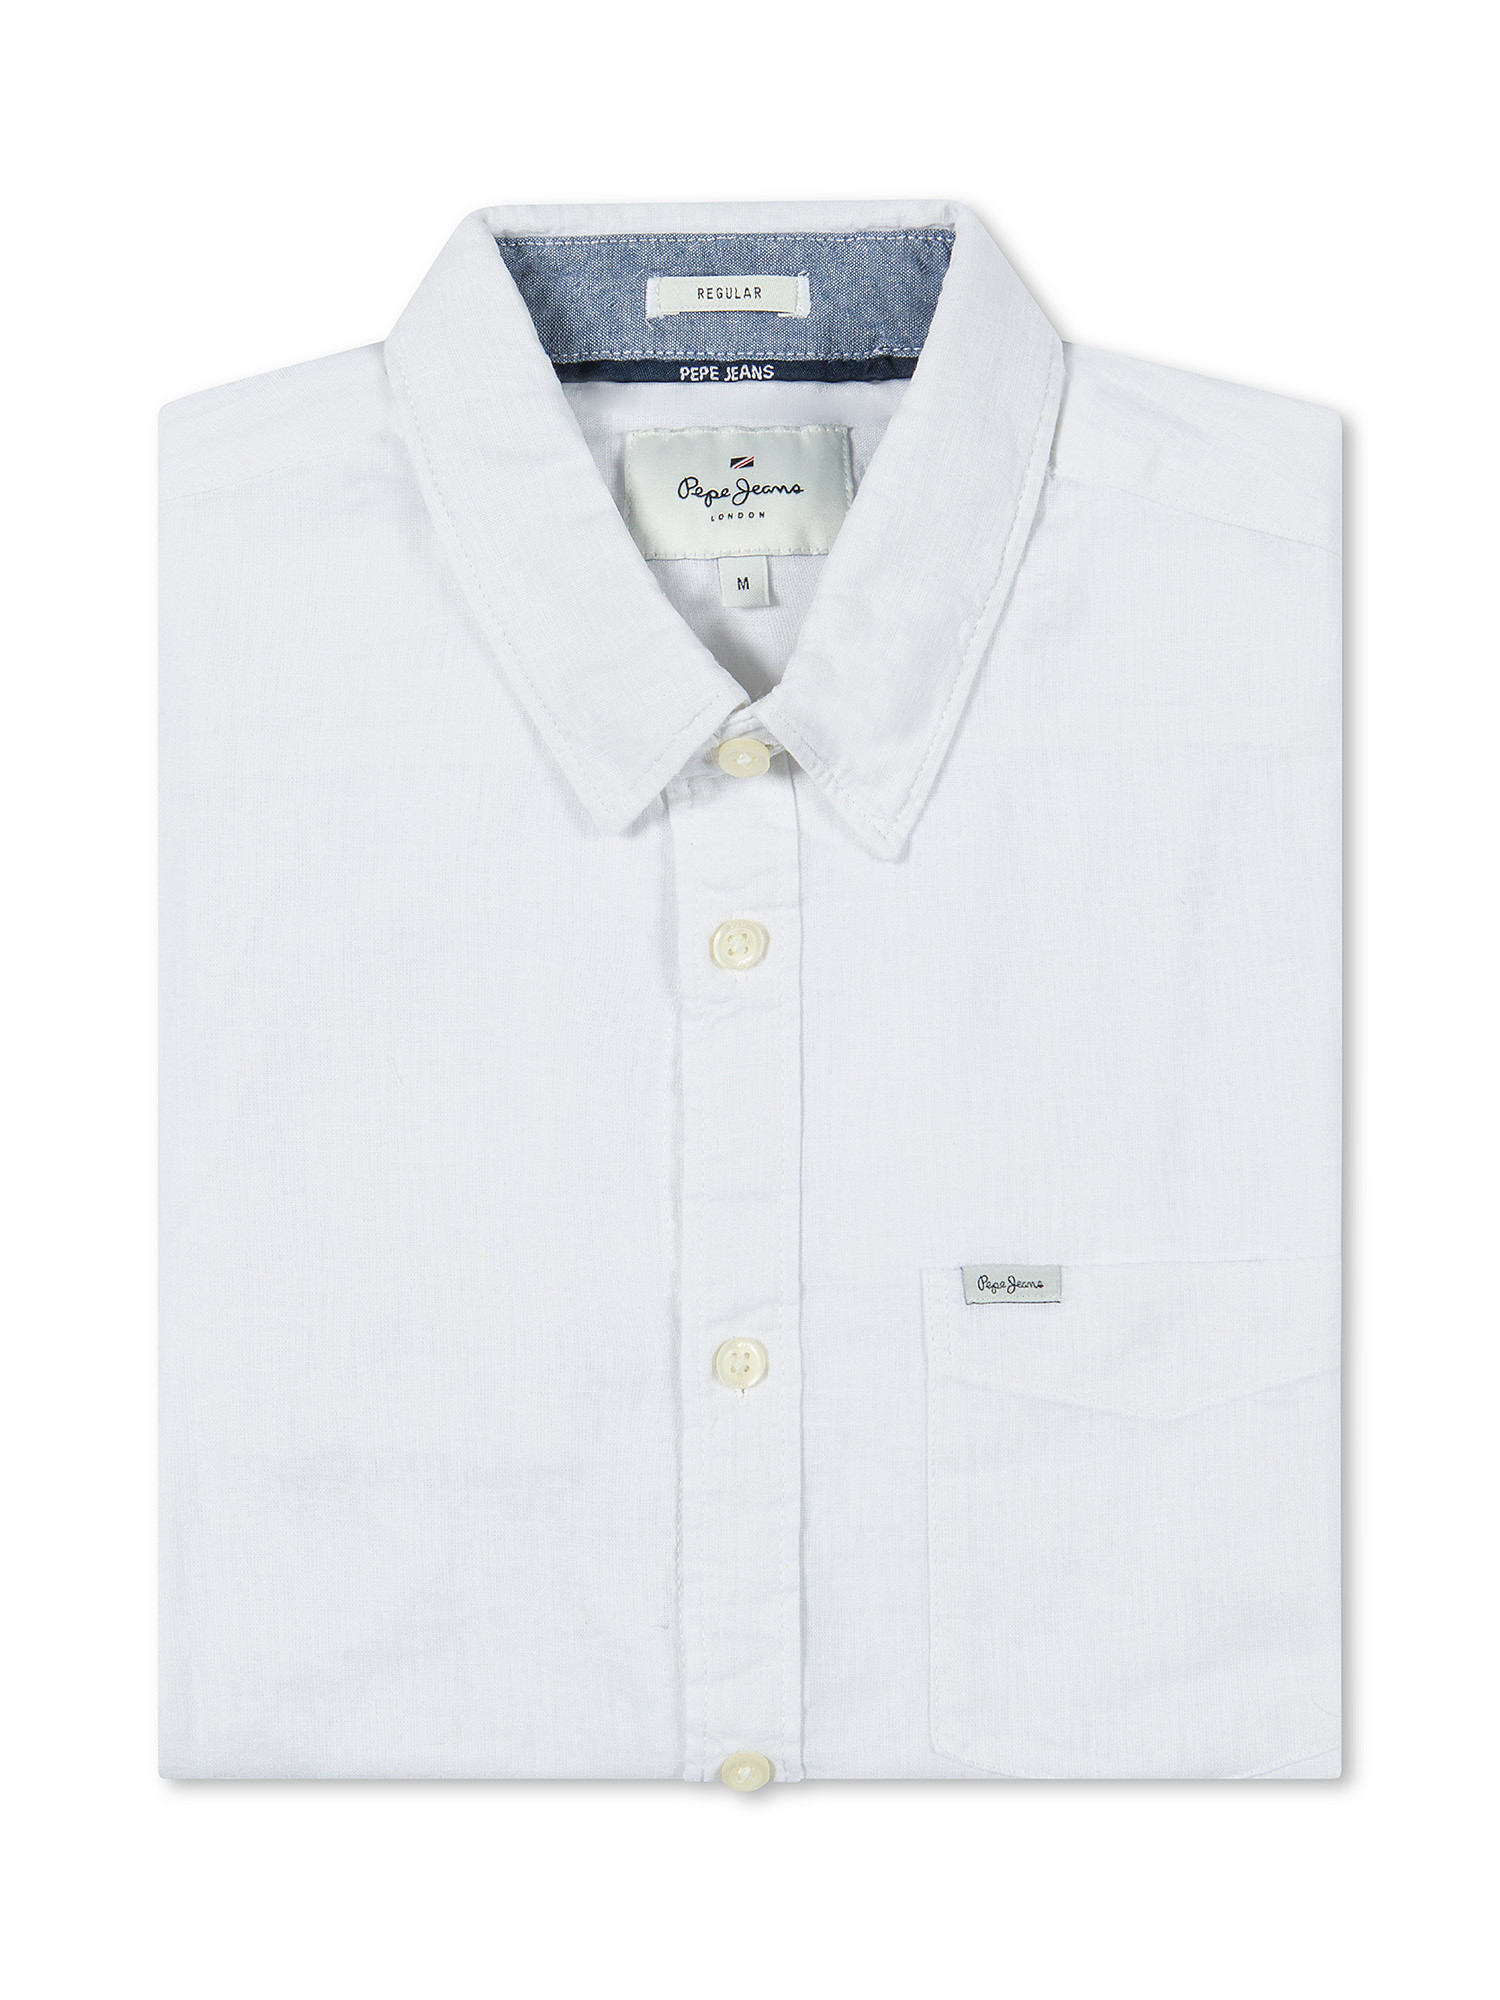 Pepe Jeans -  Camicia in misto lino, Bianco, large image number 0